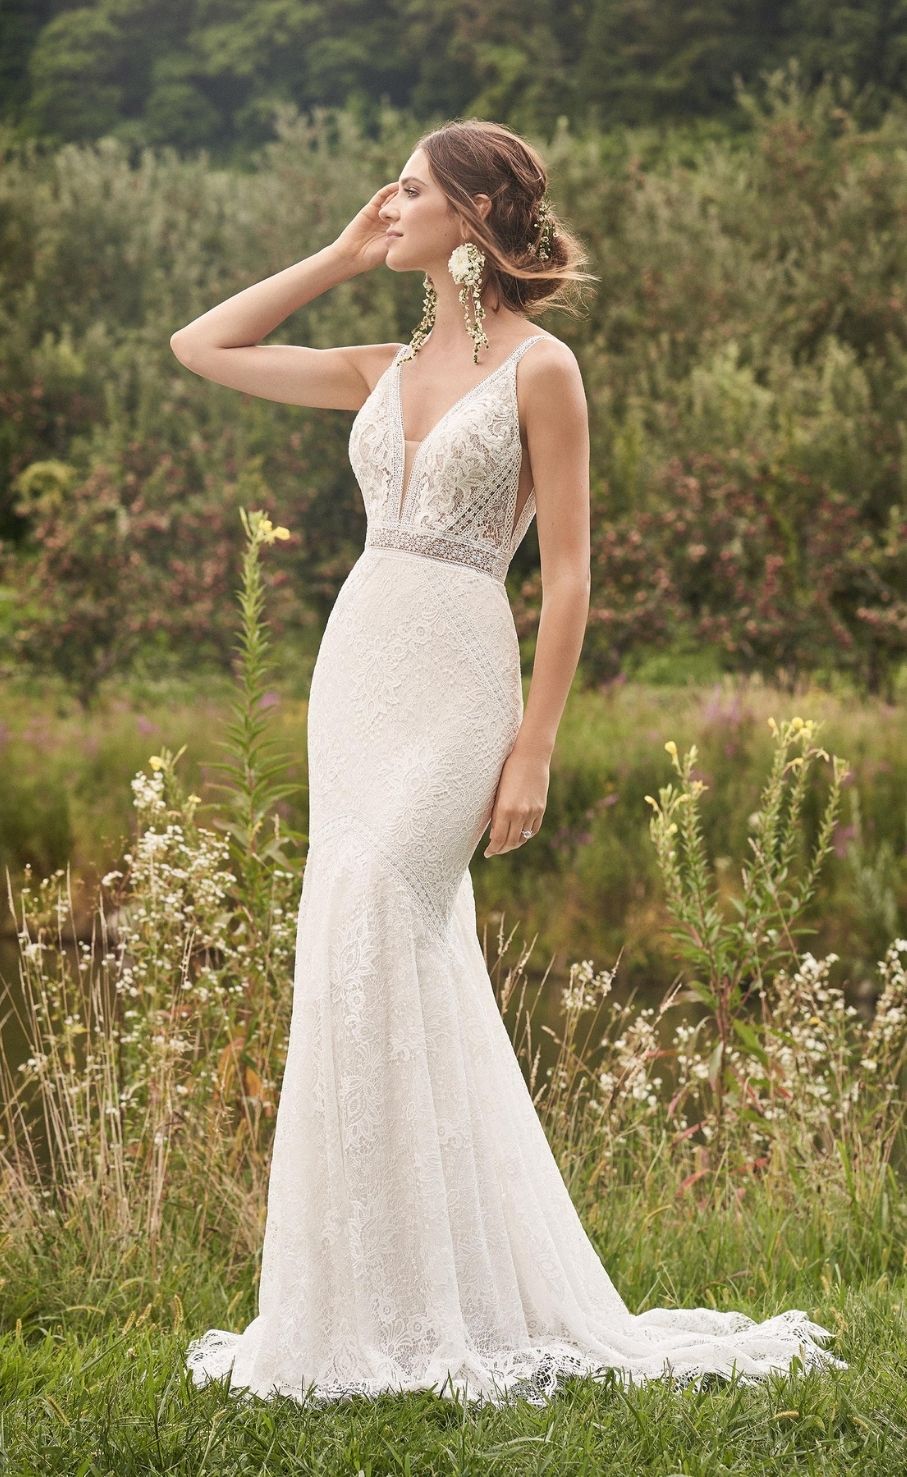 Model wearing a white J&B bridals gown